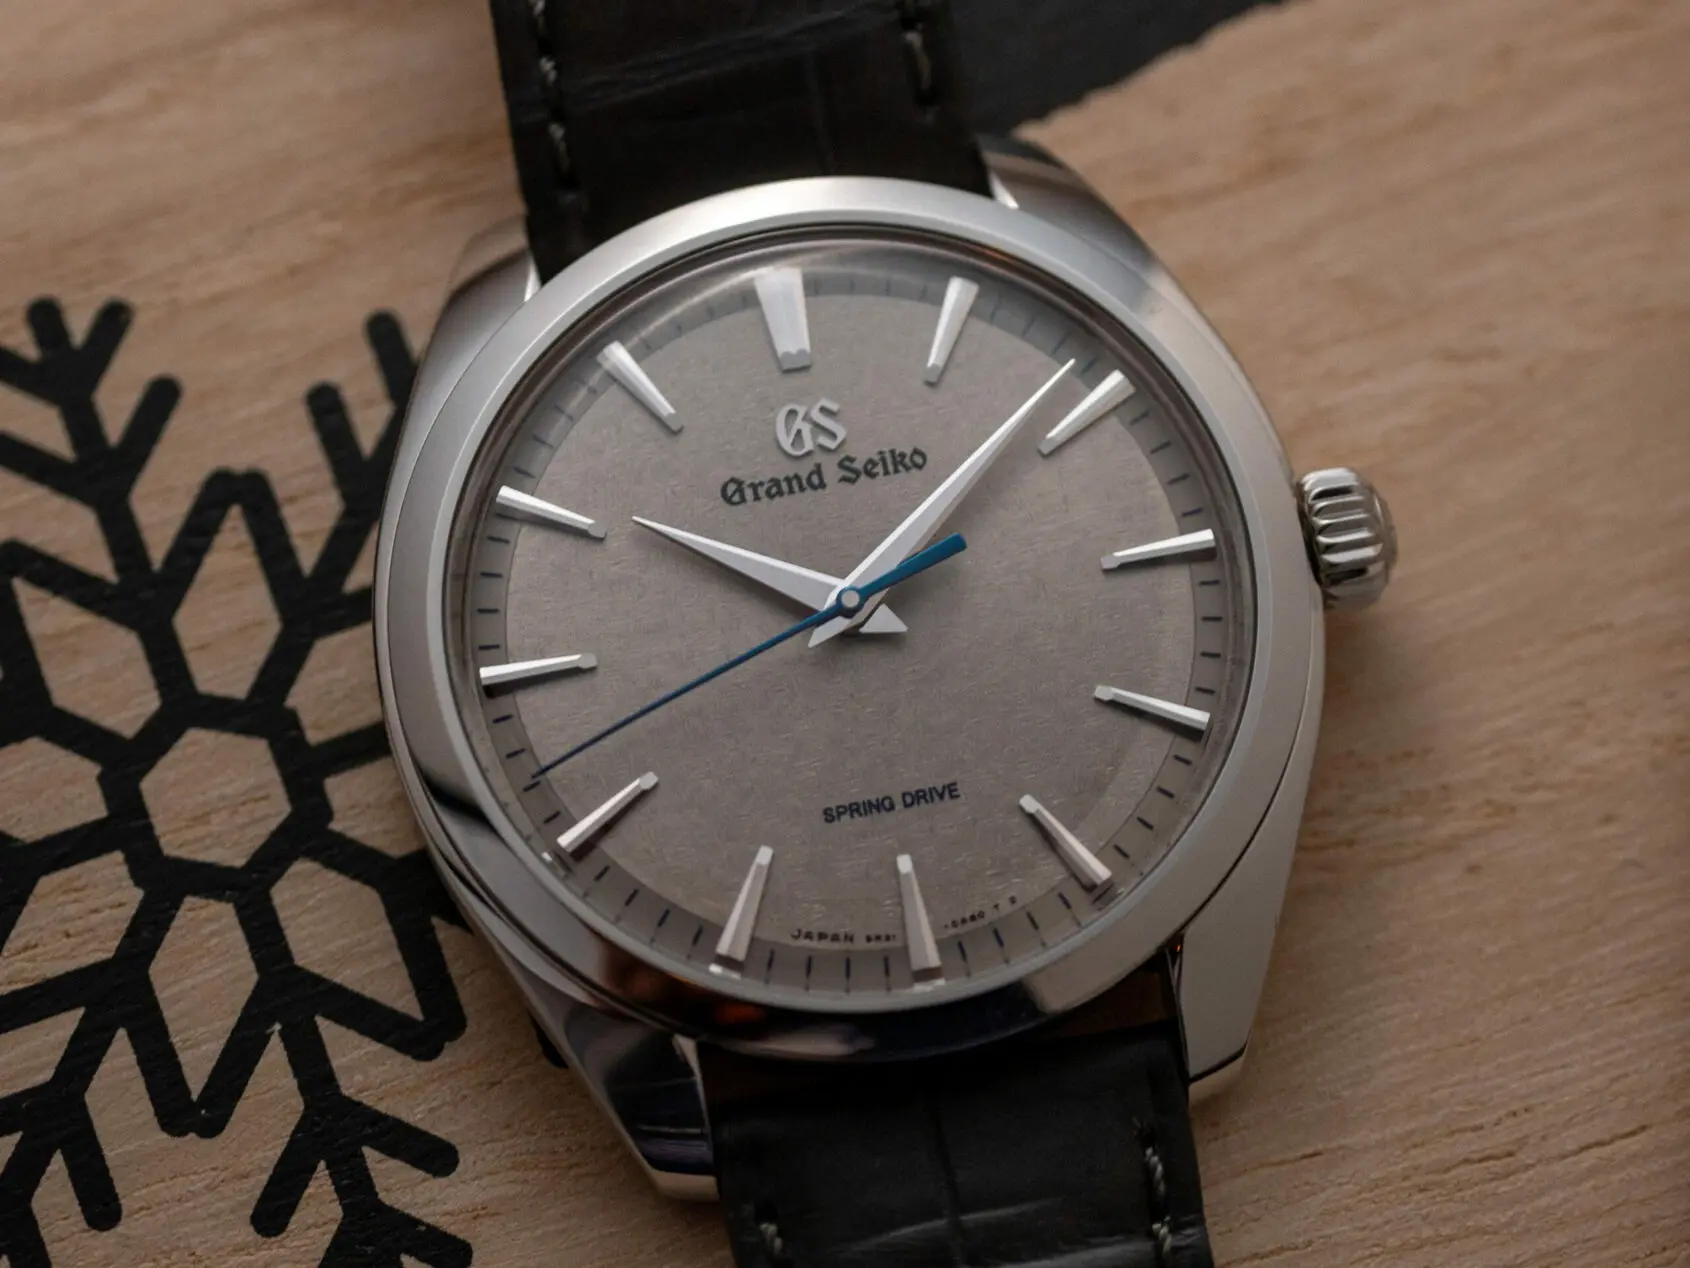 Grand Seiko: Looking at What Makes the Brand so Special – And